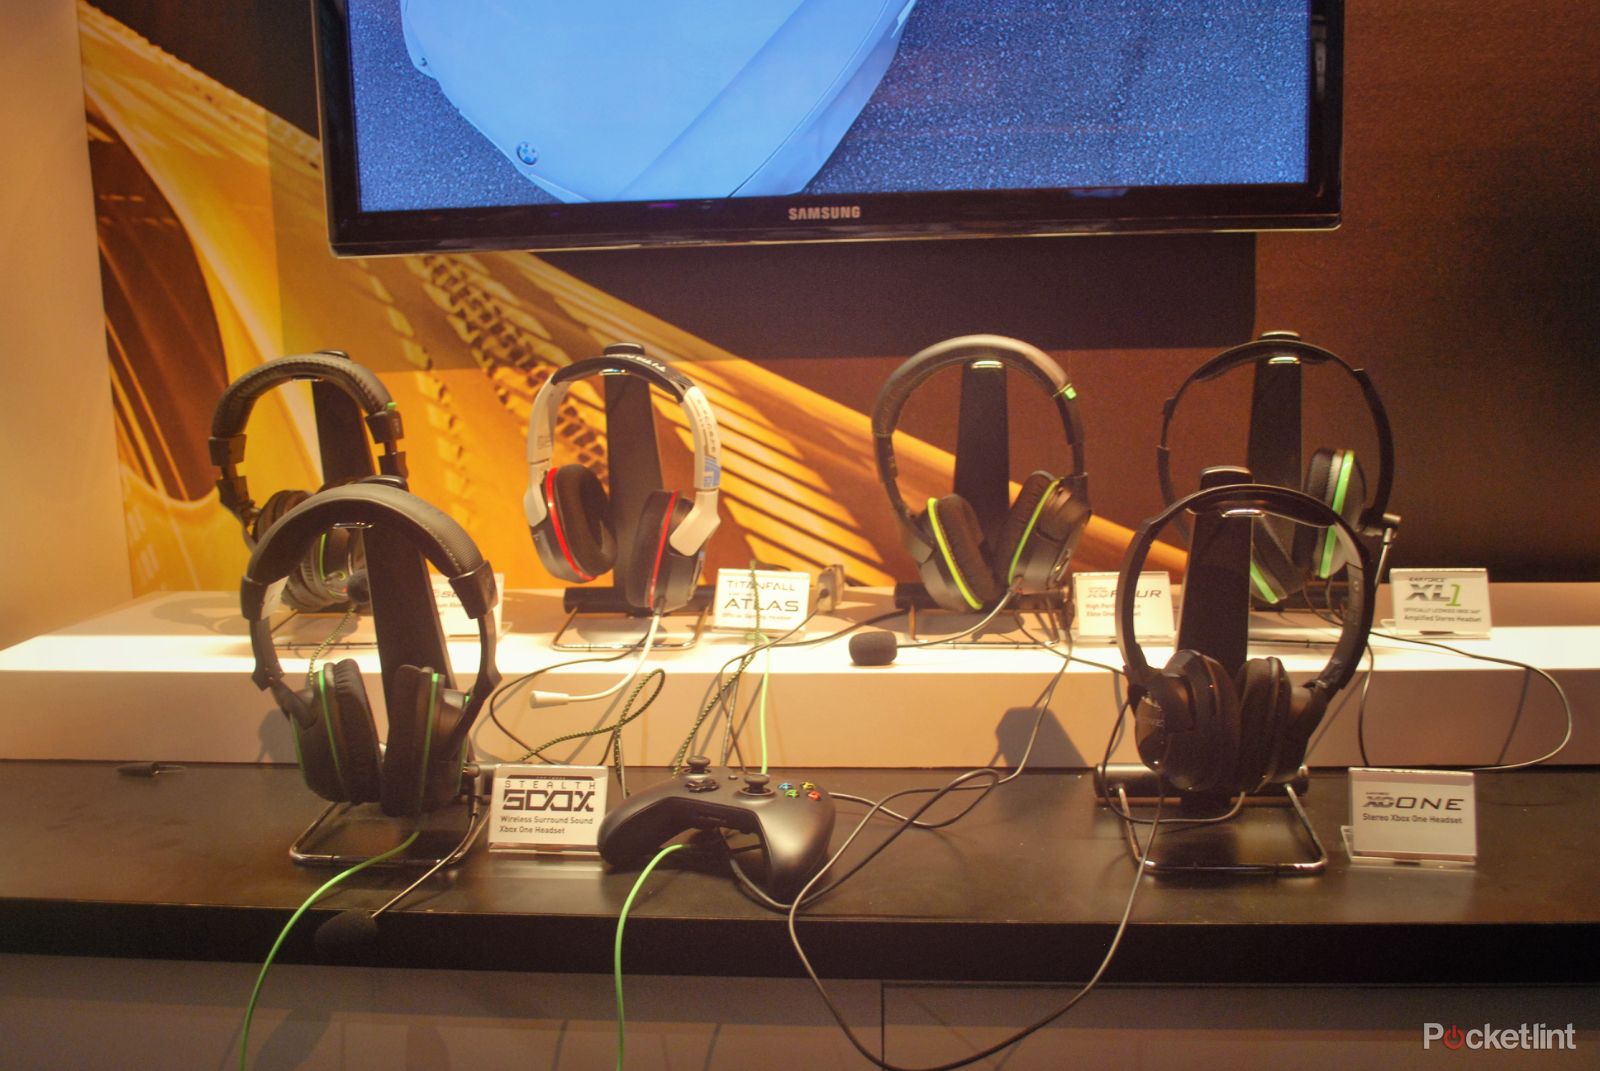 turtle beach ear force stealth 500x xbox one headset elite 800 ps4 headset and more pictures and hands on image 7